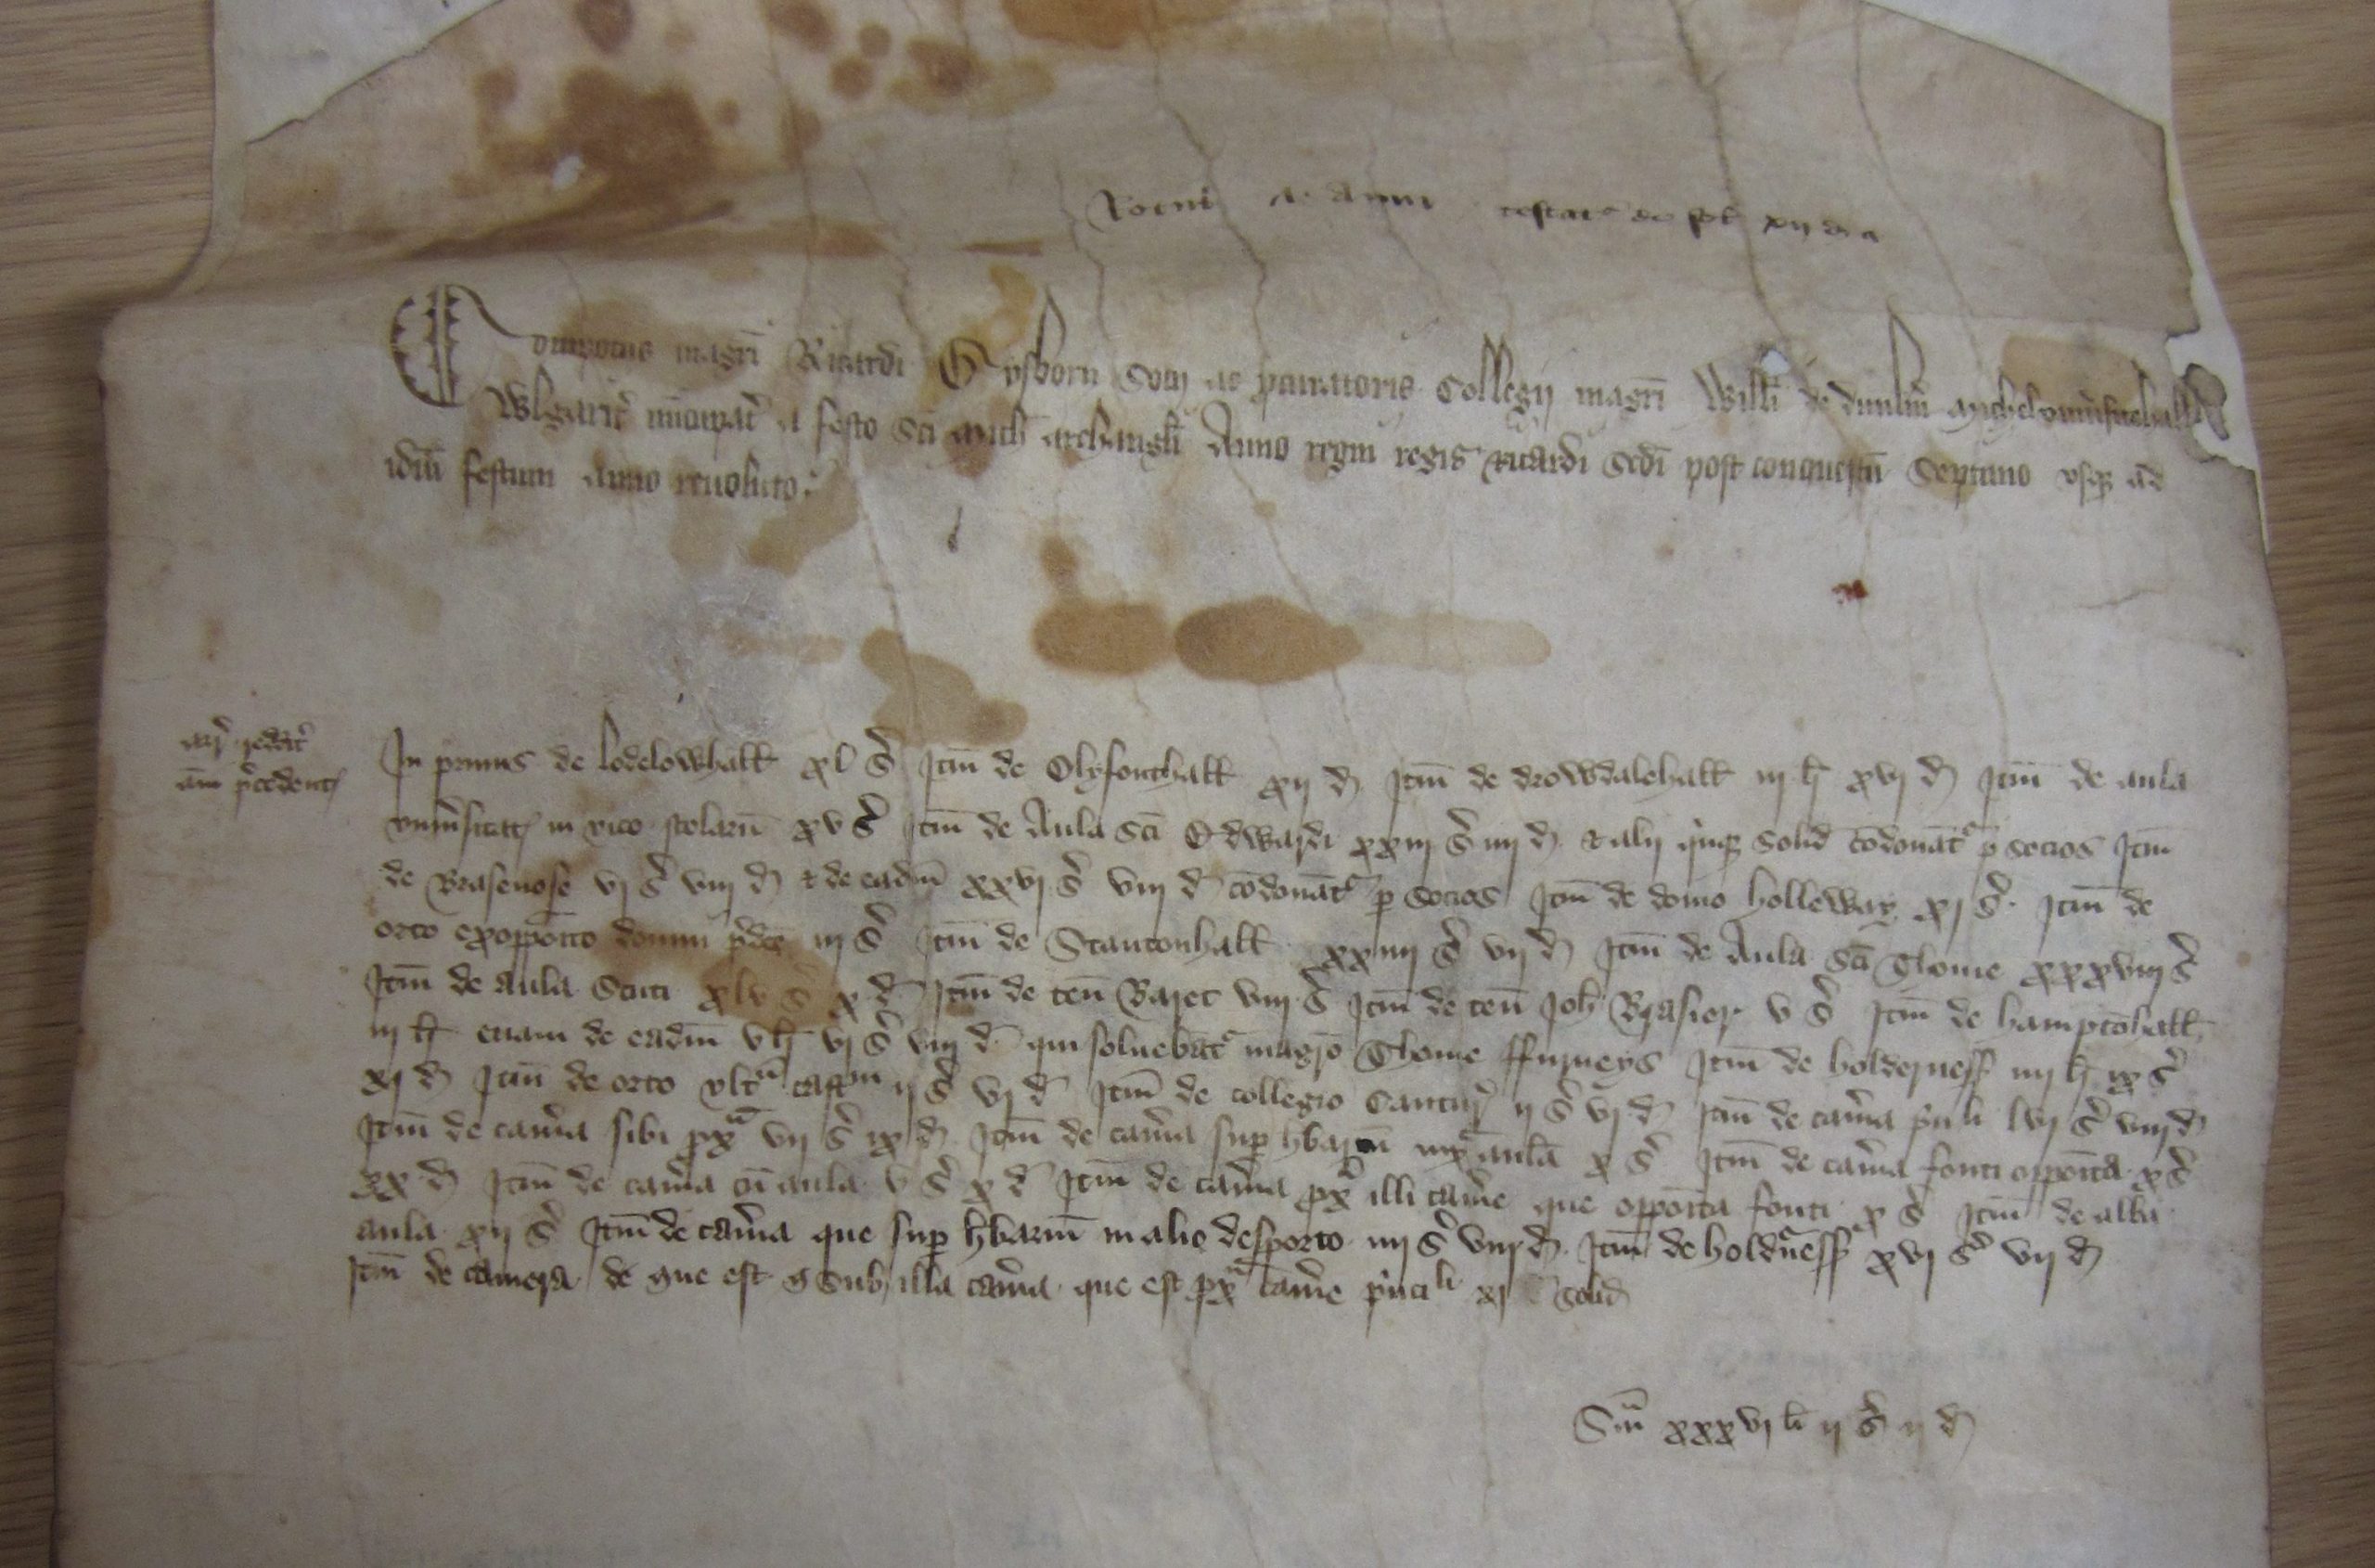 The opening of the account roll of University College, Oxford, for 1383/4